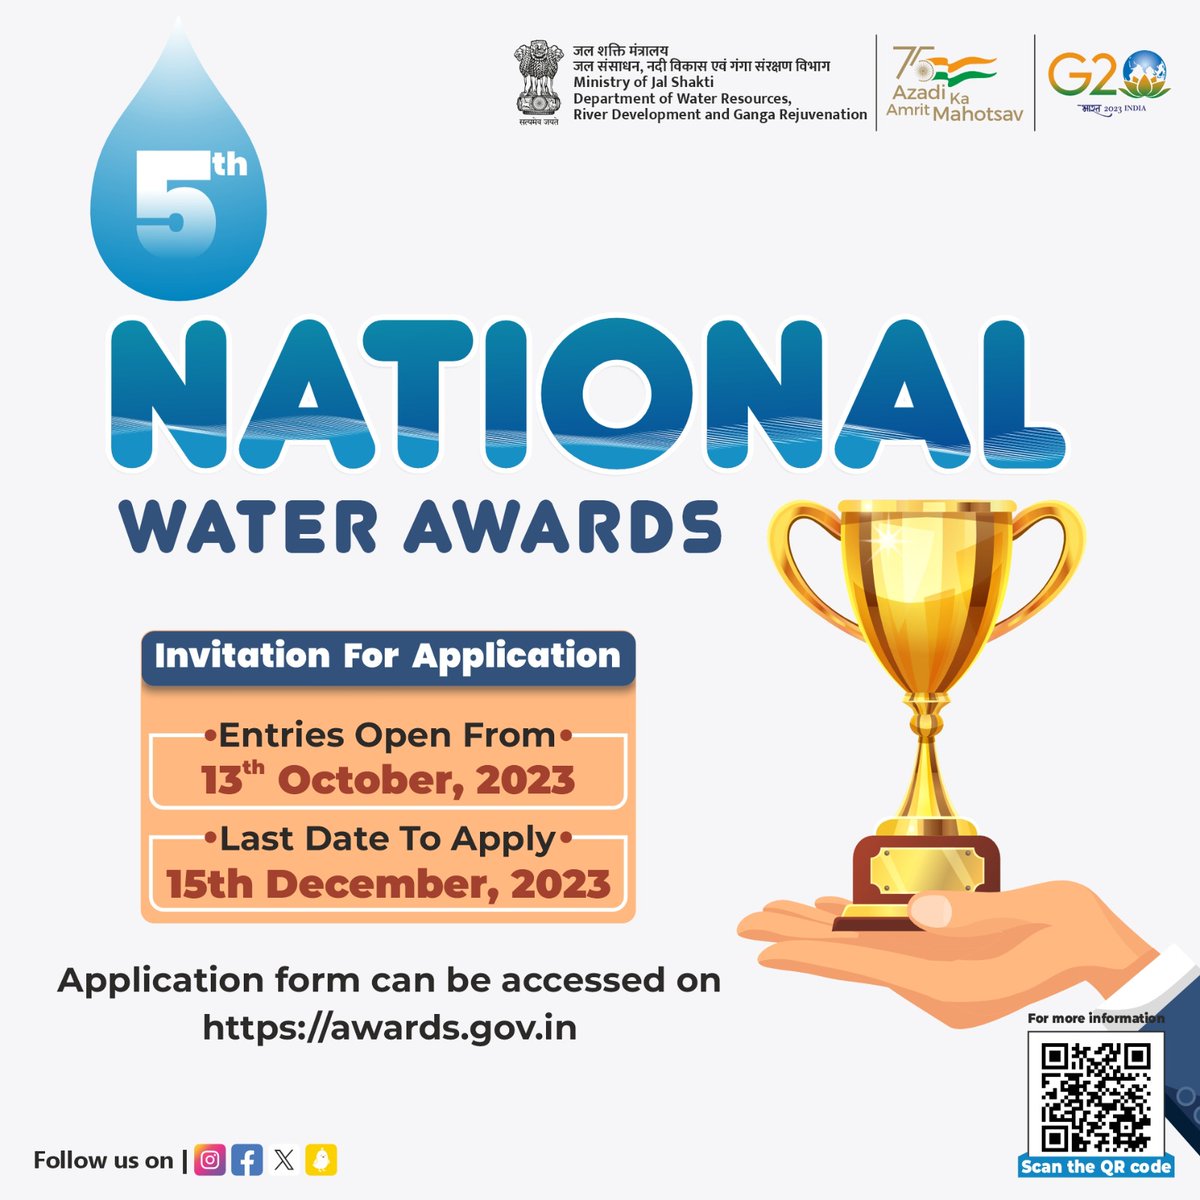 From the #BestState to #Best Individual, we've got 32 #awards up for grabs! Trophies, citations & cash prizes await the #champions of 5th #NationalWaterAwards. Let's honour those leading the charge for a #sustainablefuture! #WaterLeaders #WaterHeroes #JalShakti #WaterAwards2023